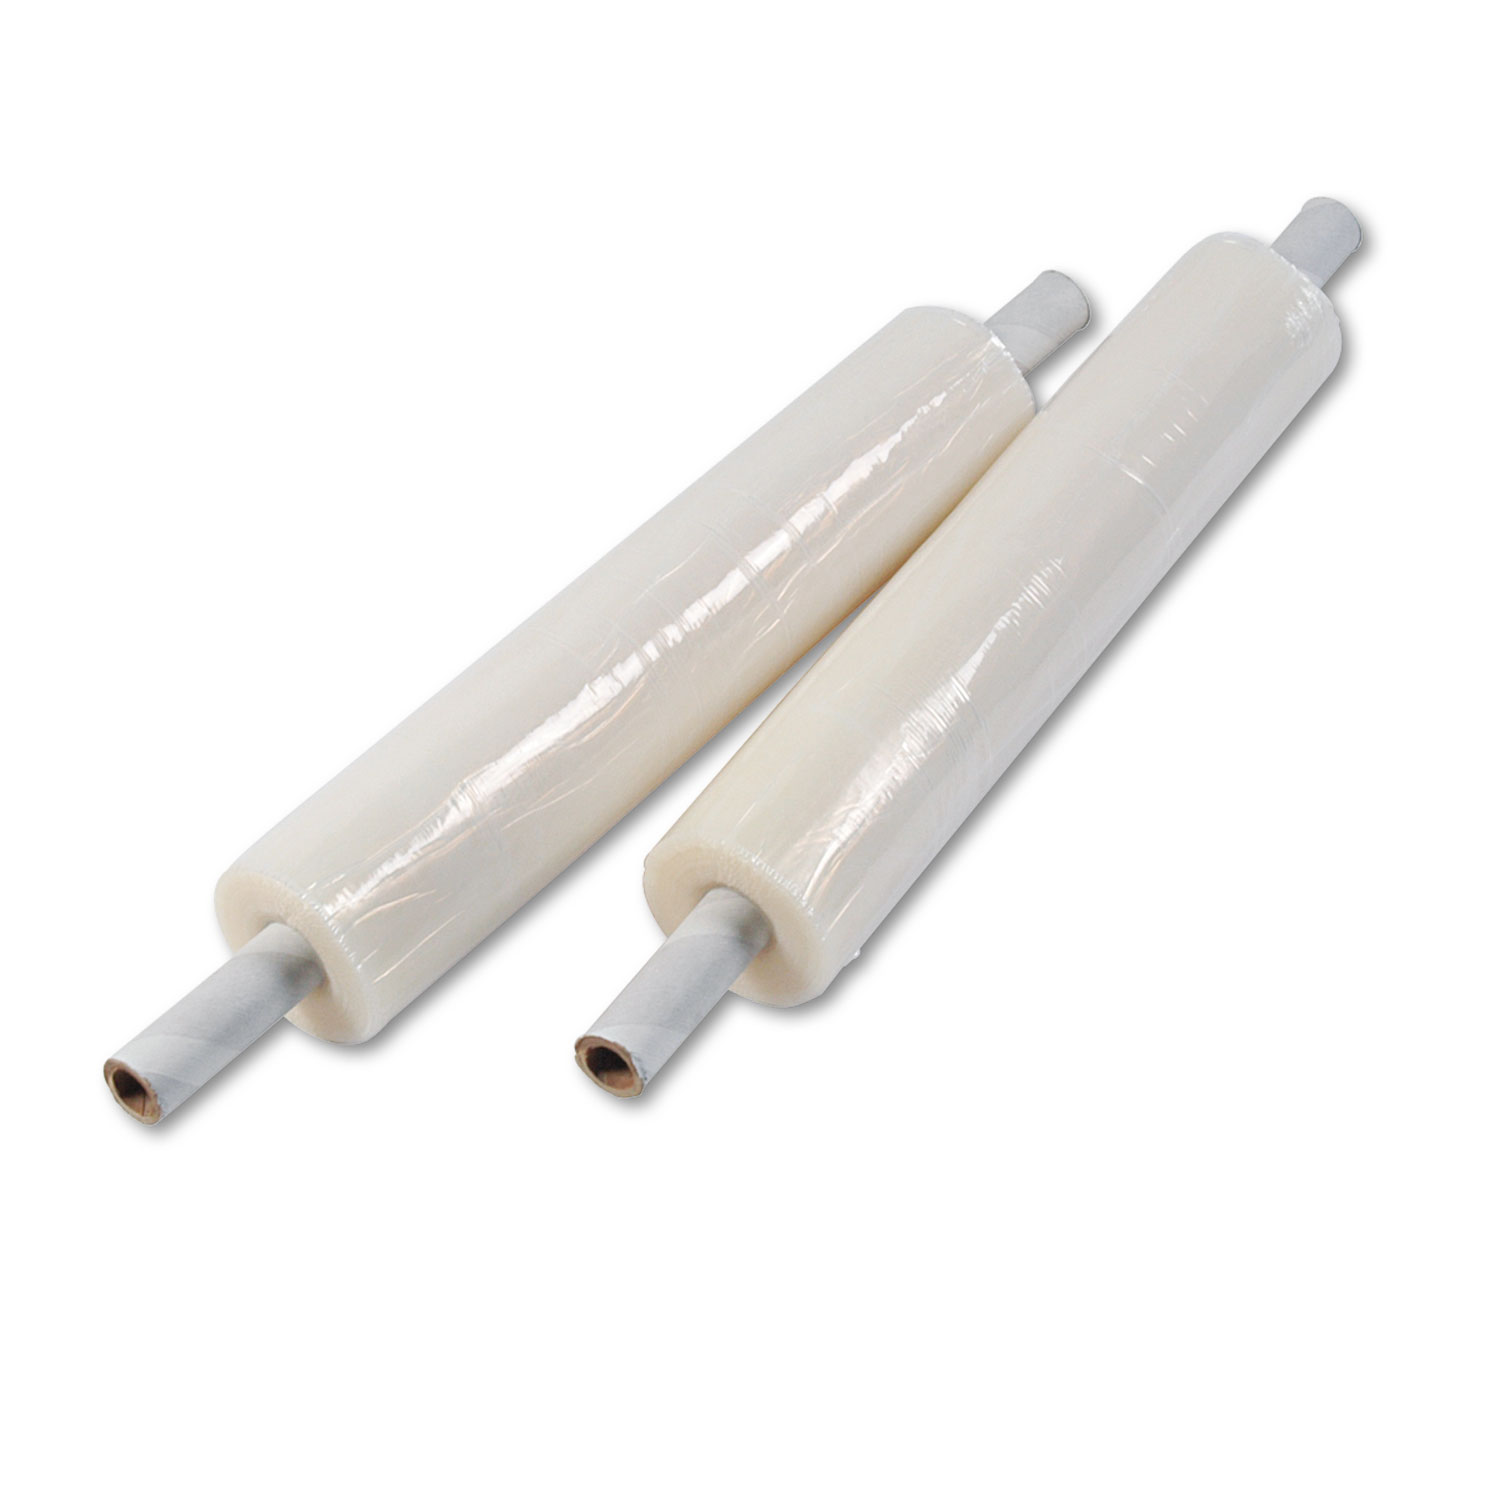 Stretch Film with Preattached Handles, 20" x 1000ft, 20mic (80-Gauge), 4/Carton